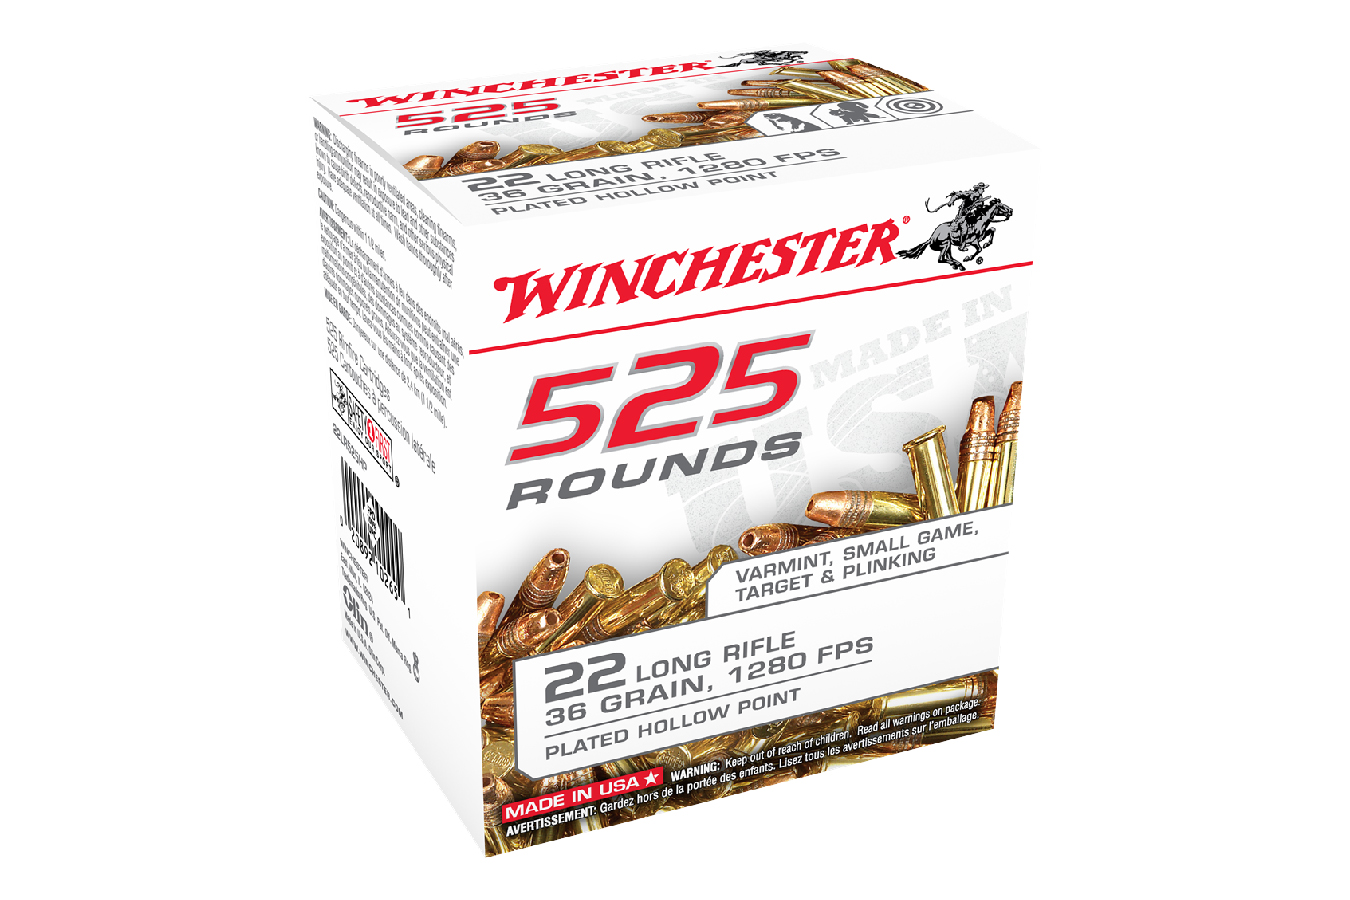 22 LR 36 GR COPPER PLATED HP 525/BOX